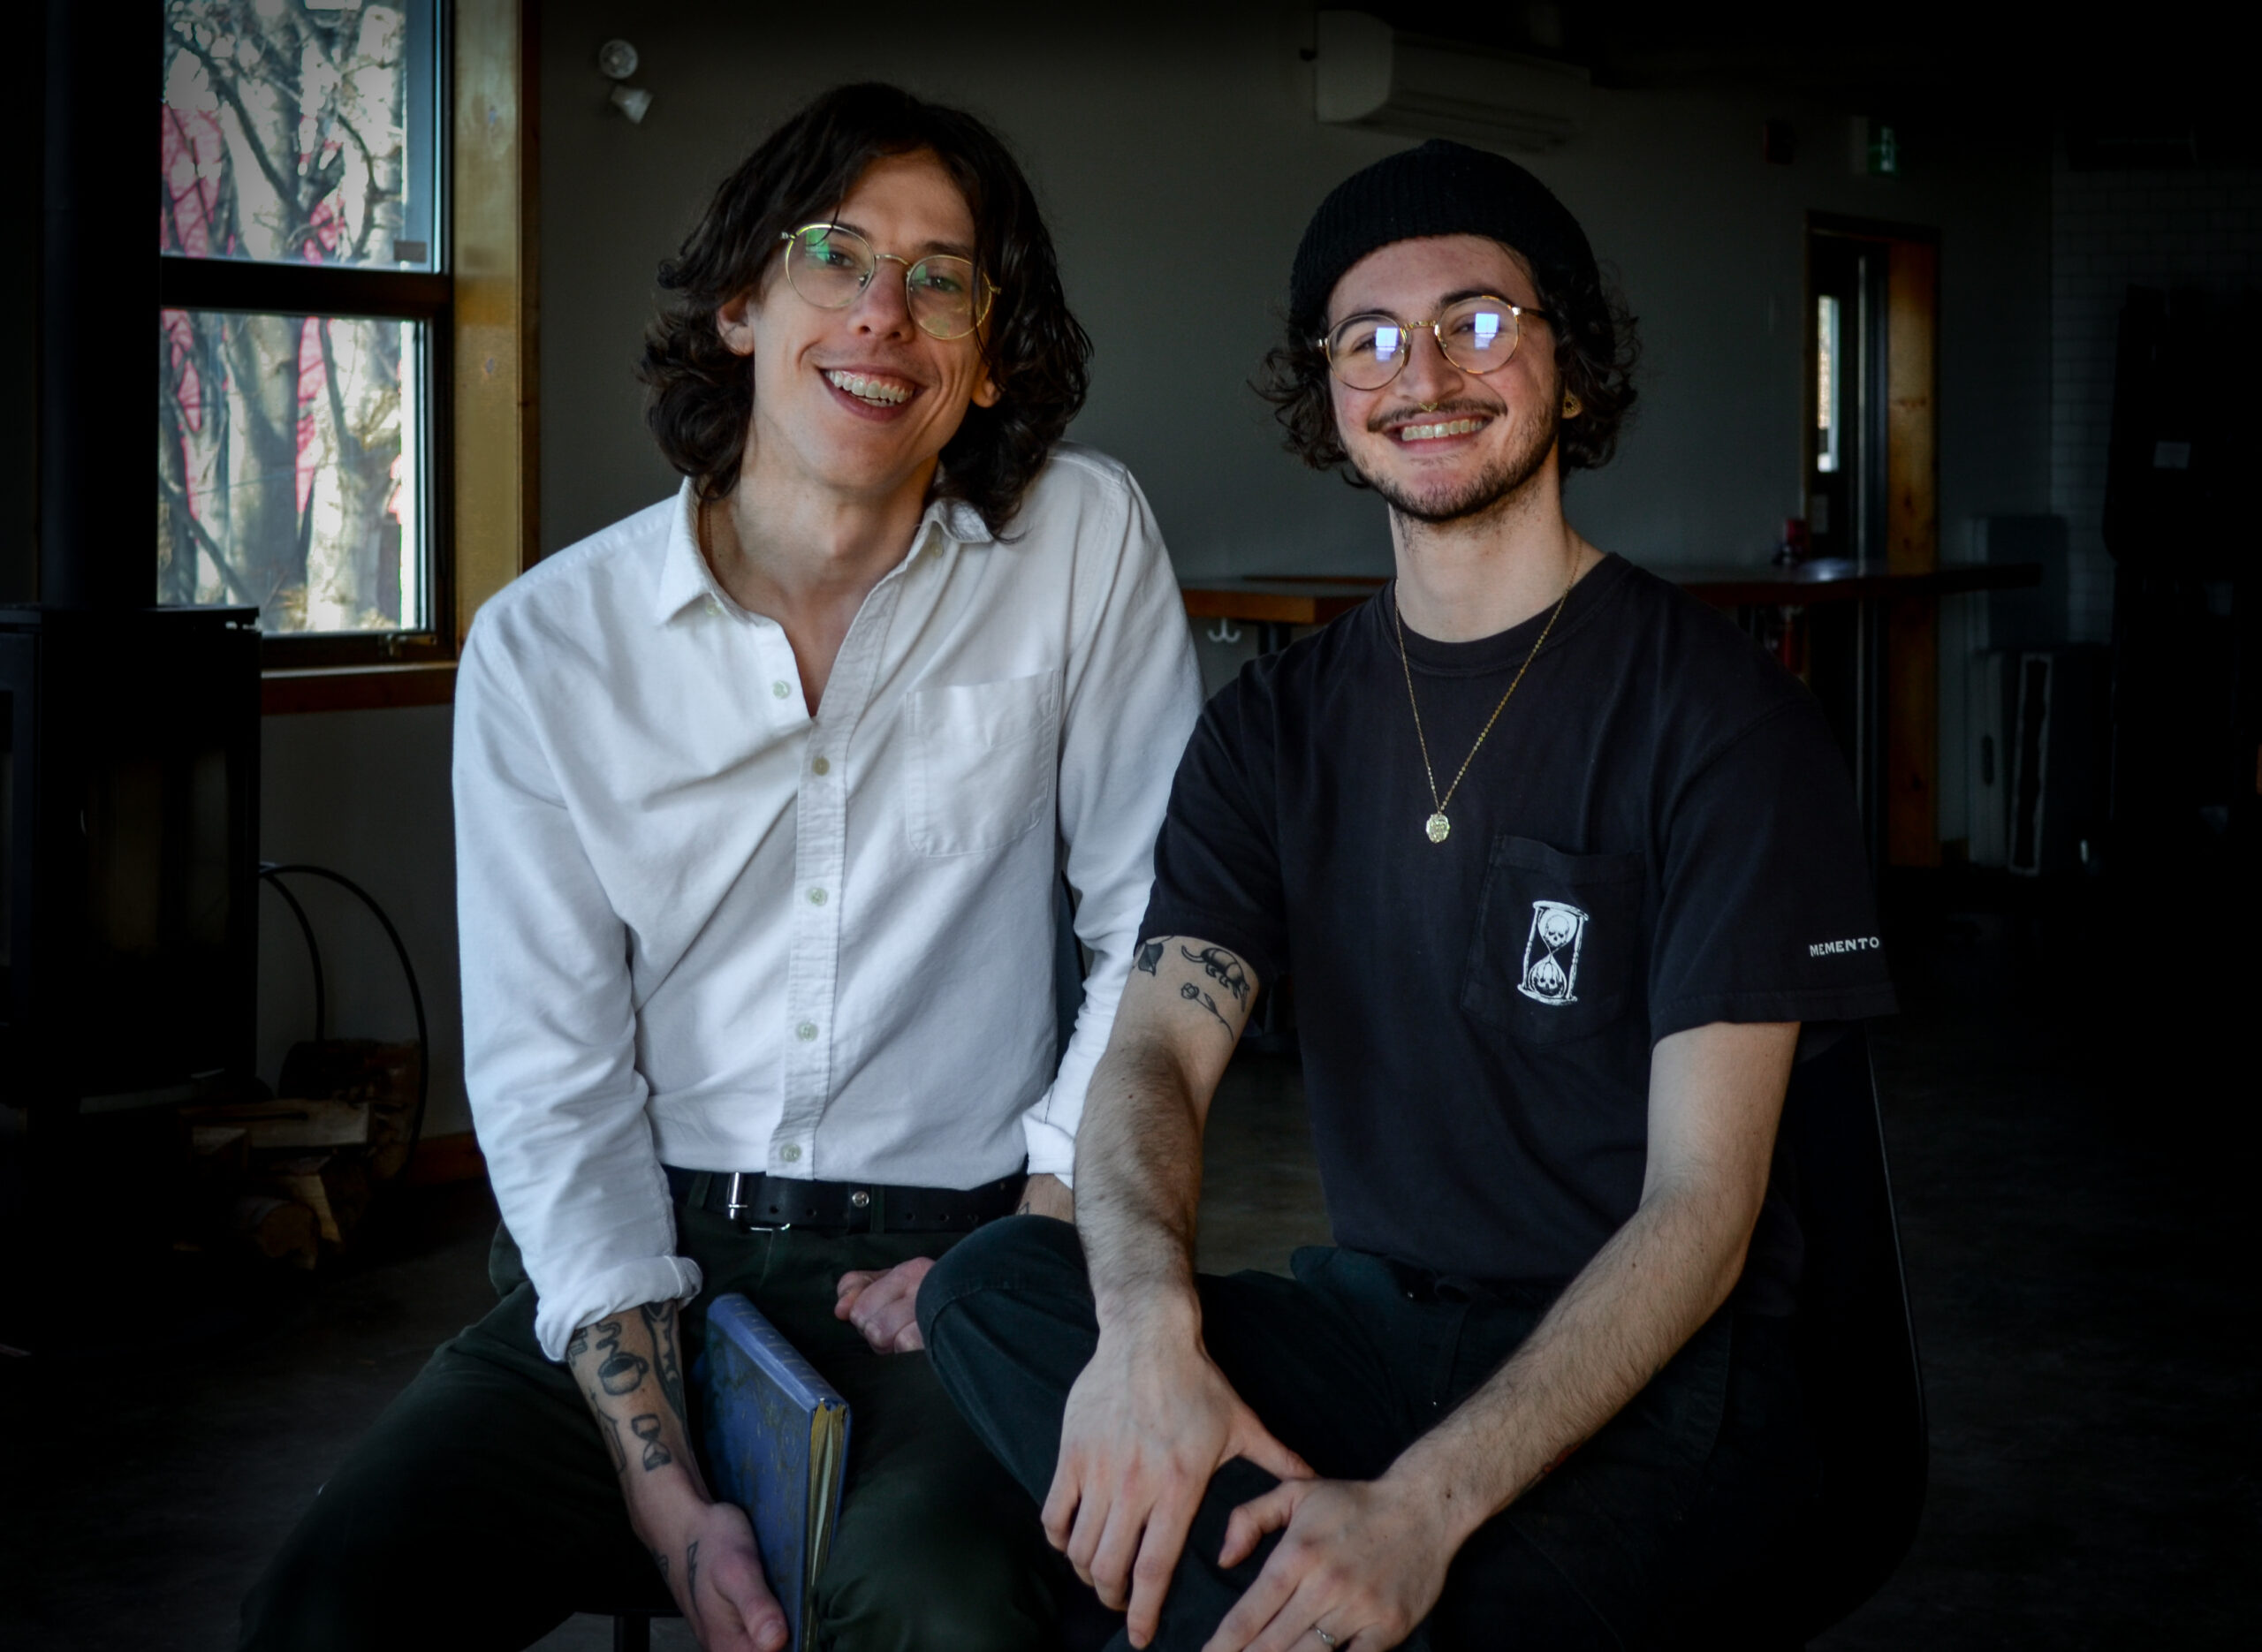 Jason Normore and Lincoln Ripley sit pn stolls at the second floor of the Bannerman brewery. Jason is wearing a white button-down collared shirt with grey pants. He has several arm tattoos, messy brown hair, and round glasses. Lincoln is wearing a black beanie hat, a dark grey t-shirt with an hourglass on the chest, and round glasses. A window is seen in the background.